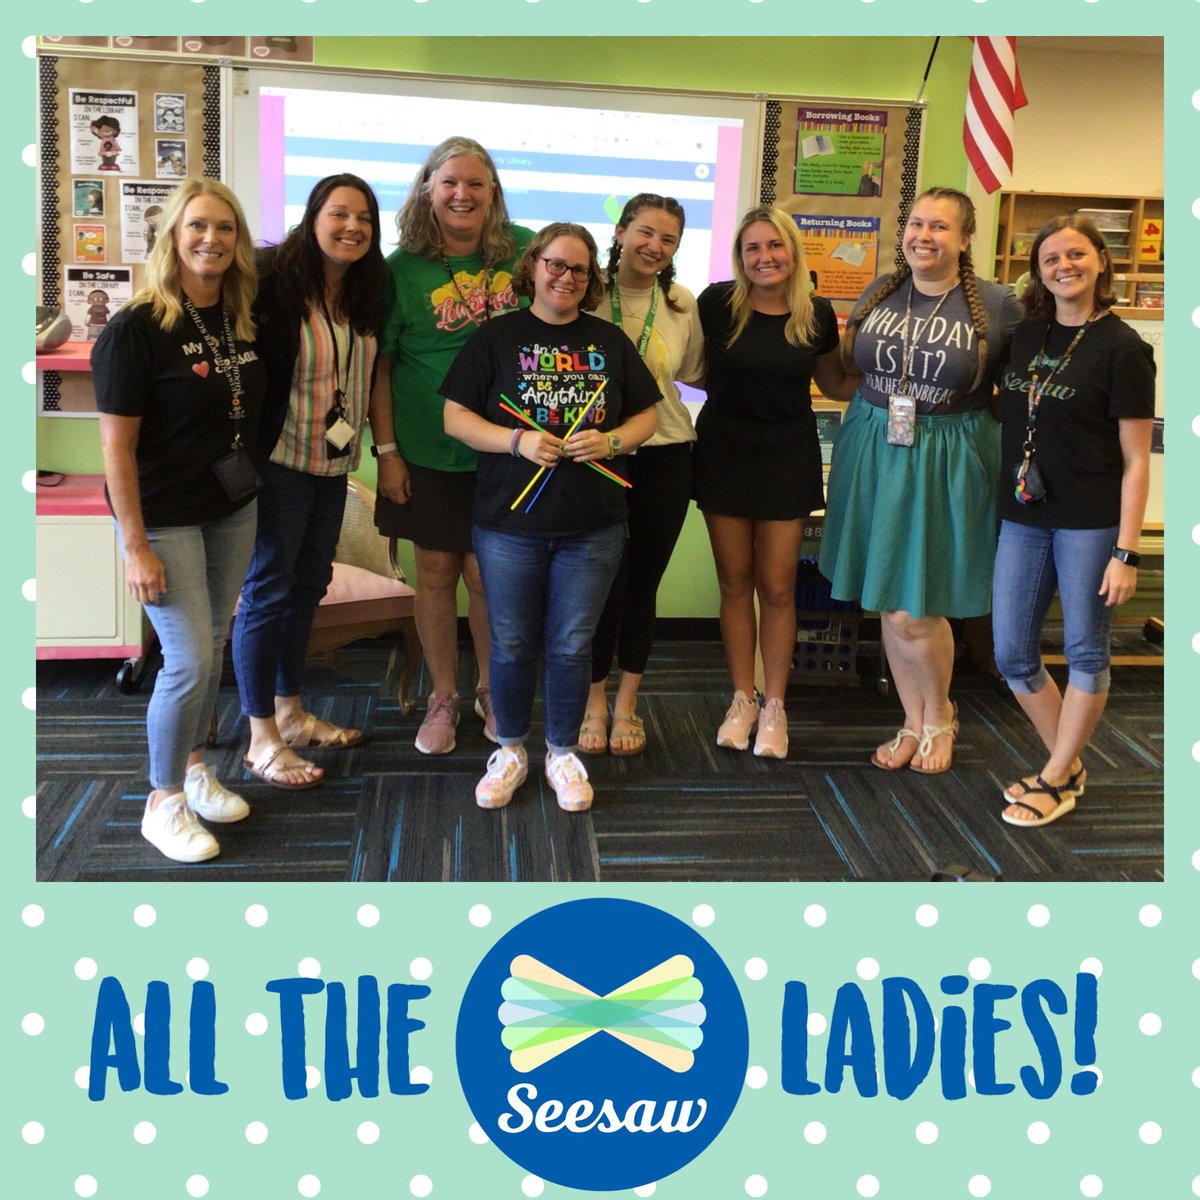 All the @Seesaw ladies, all the #Seesaw ladies! Now put your hands up… up in Ike library we did a Meet-up… we’re doing our own Seesaw thing… 🎉 #SeesawConnect #proud2bD23 #SeesawCertifiedEducator